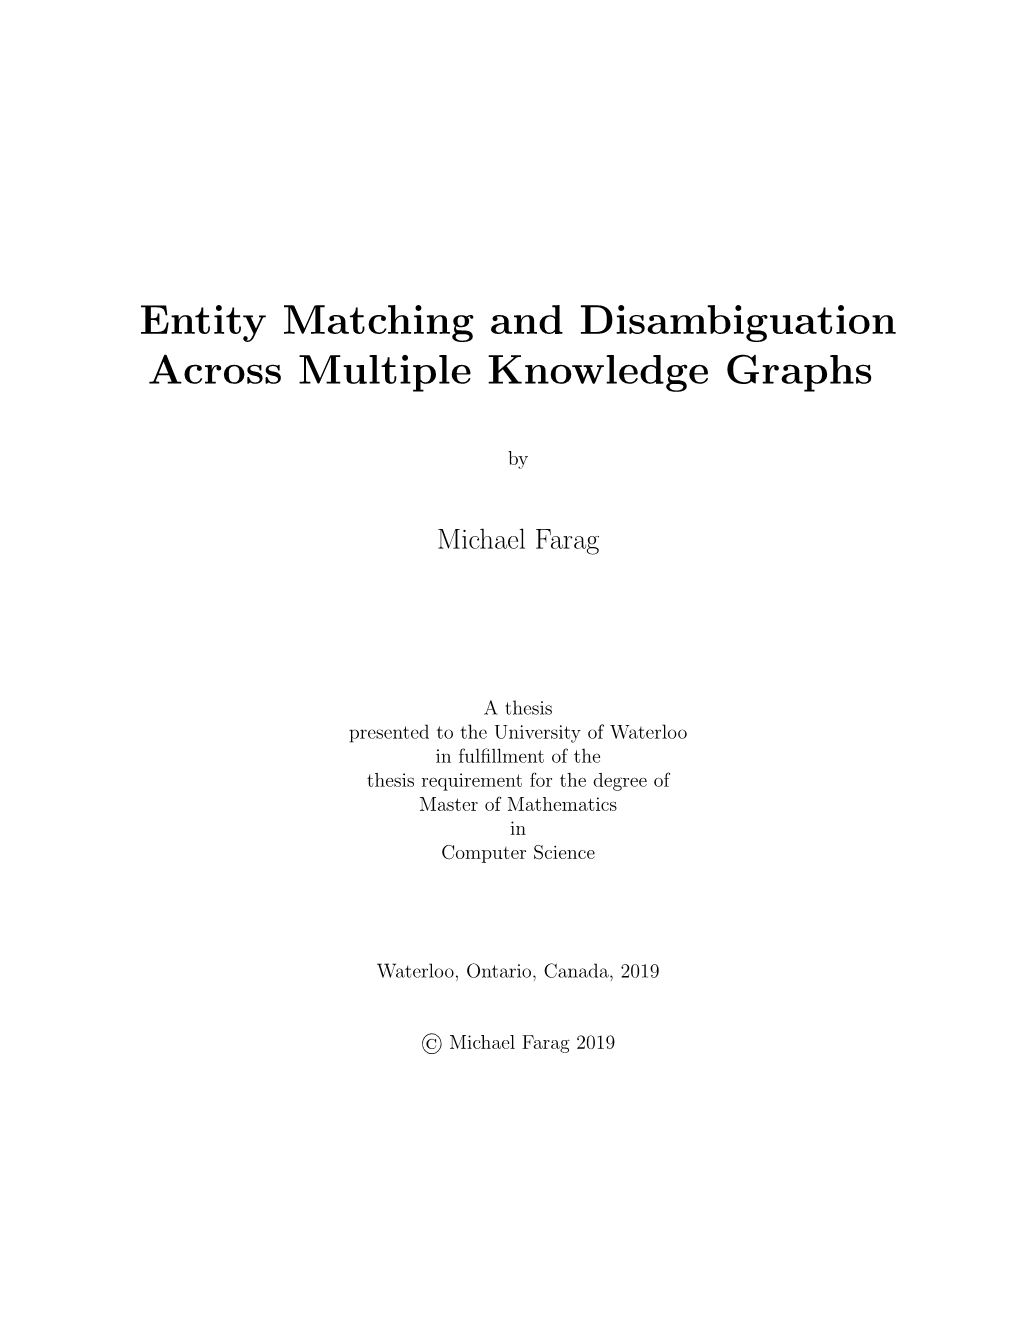 Entity Matching and Disambiguation Across Multiple Knowledge Graphs